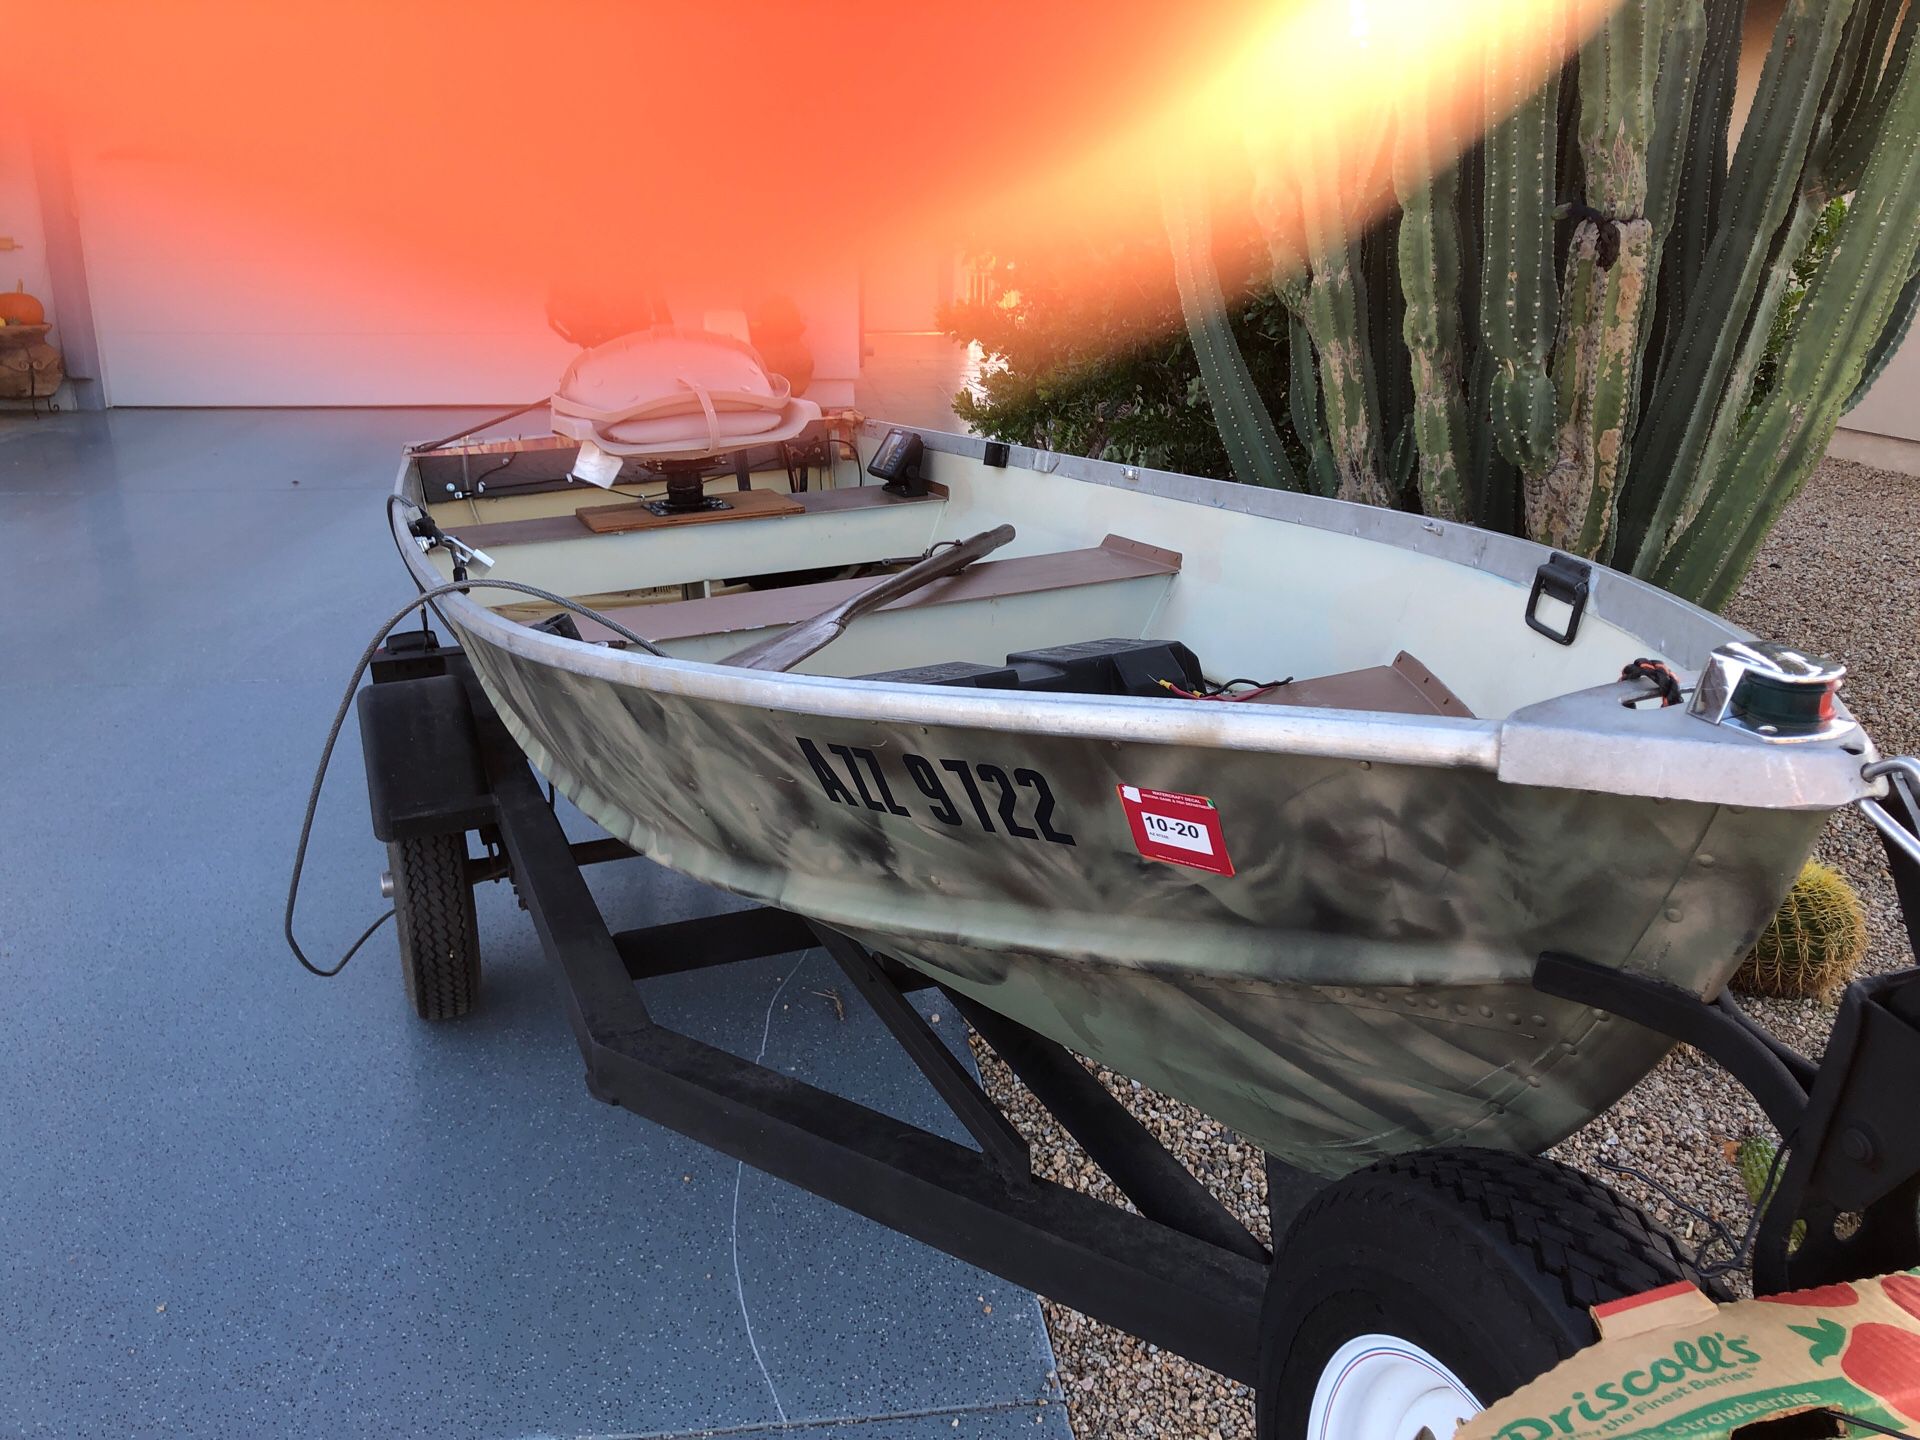 12’ aluminum boat with 5hp mercury motor, electric trolling motor, fish finder, trailer and cover